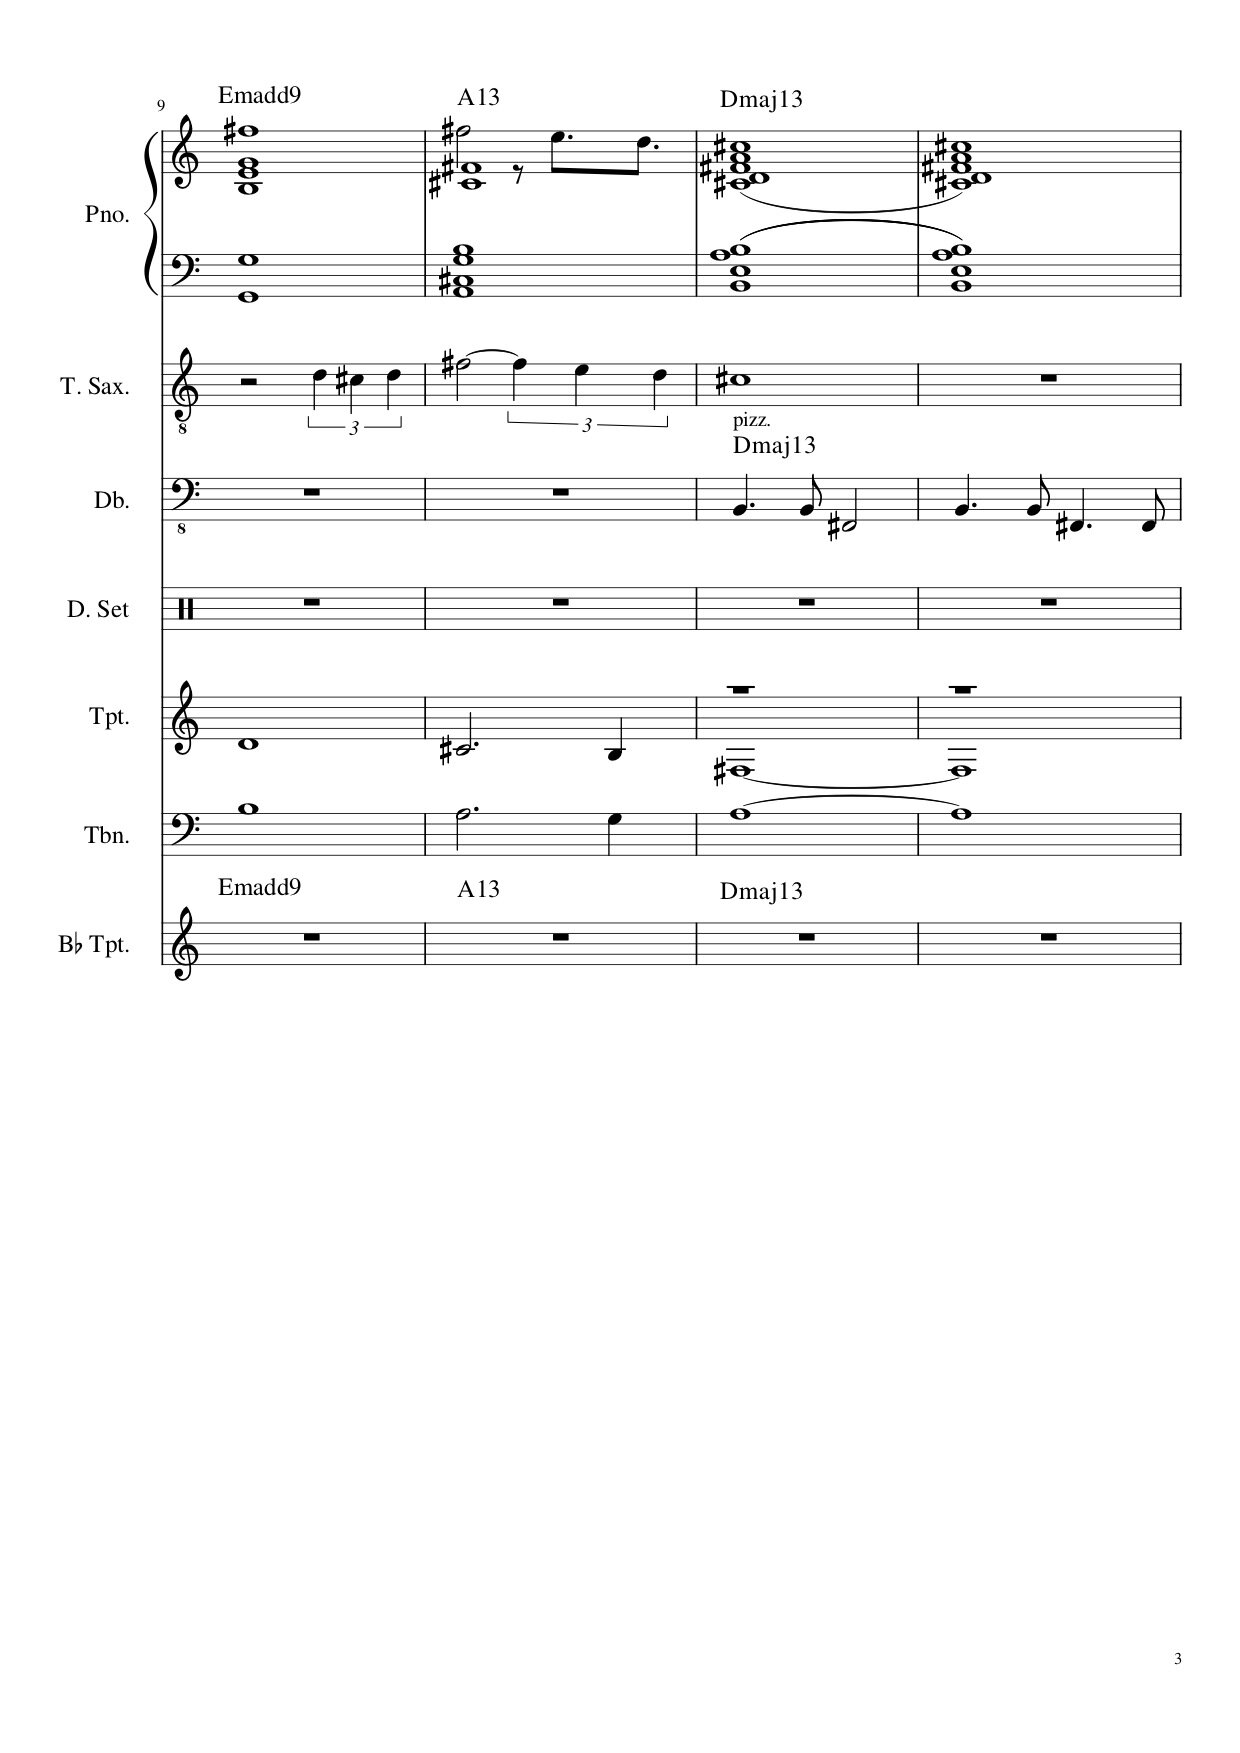 Steal Suffering Theme-Score_and_Parts pg3.jpg